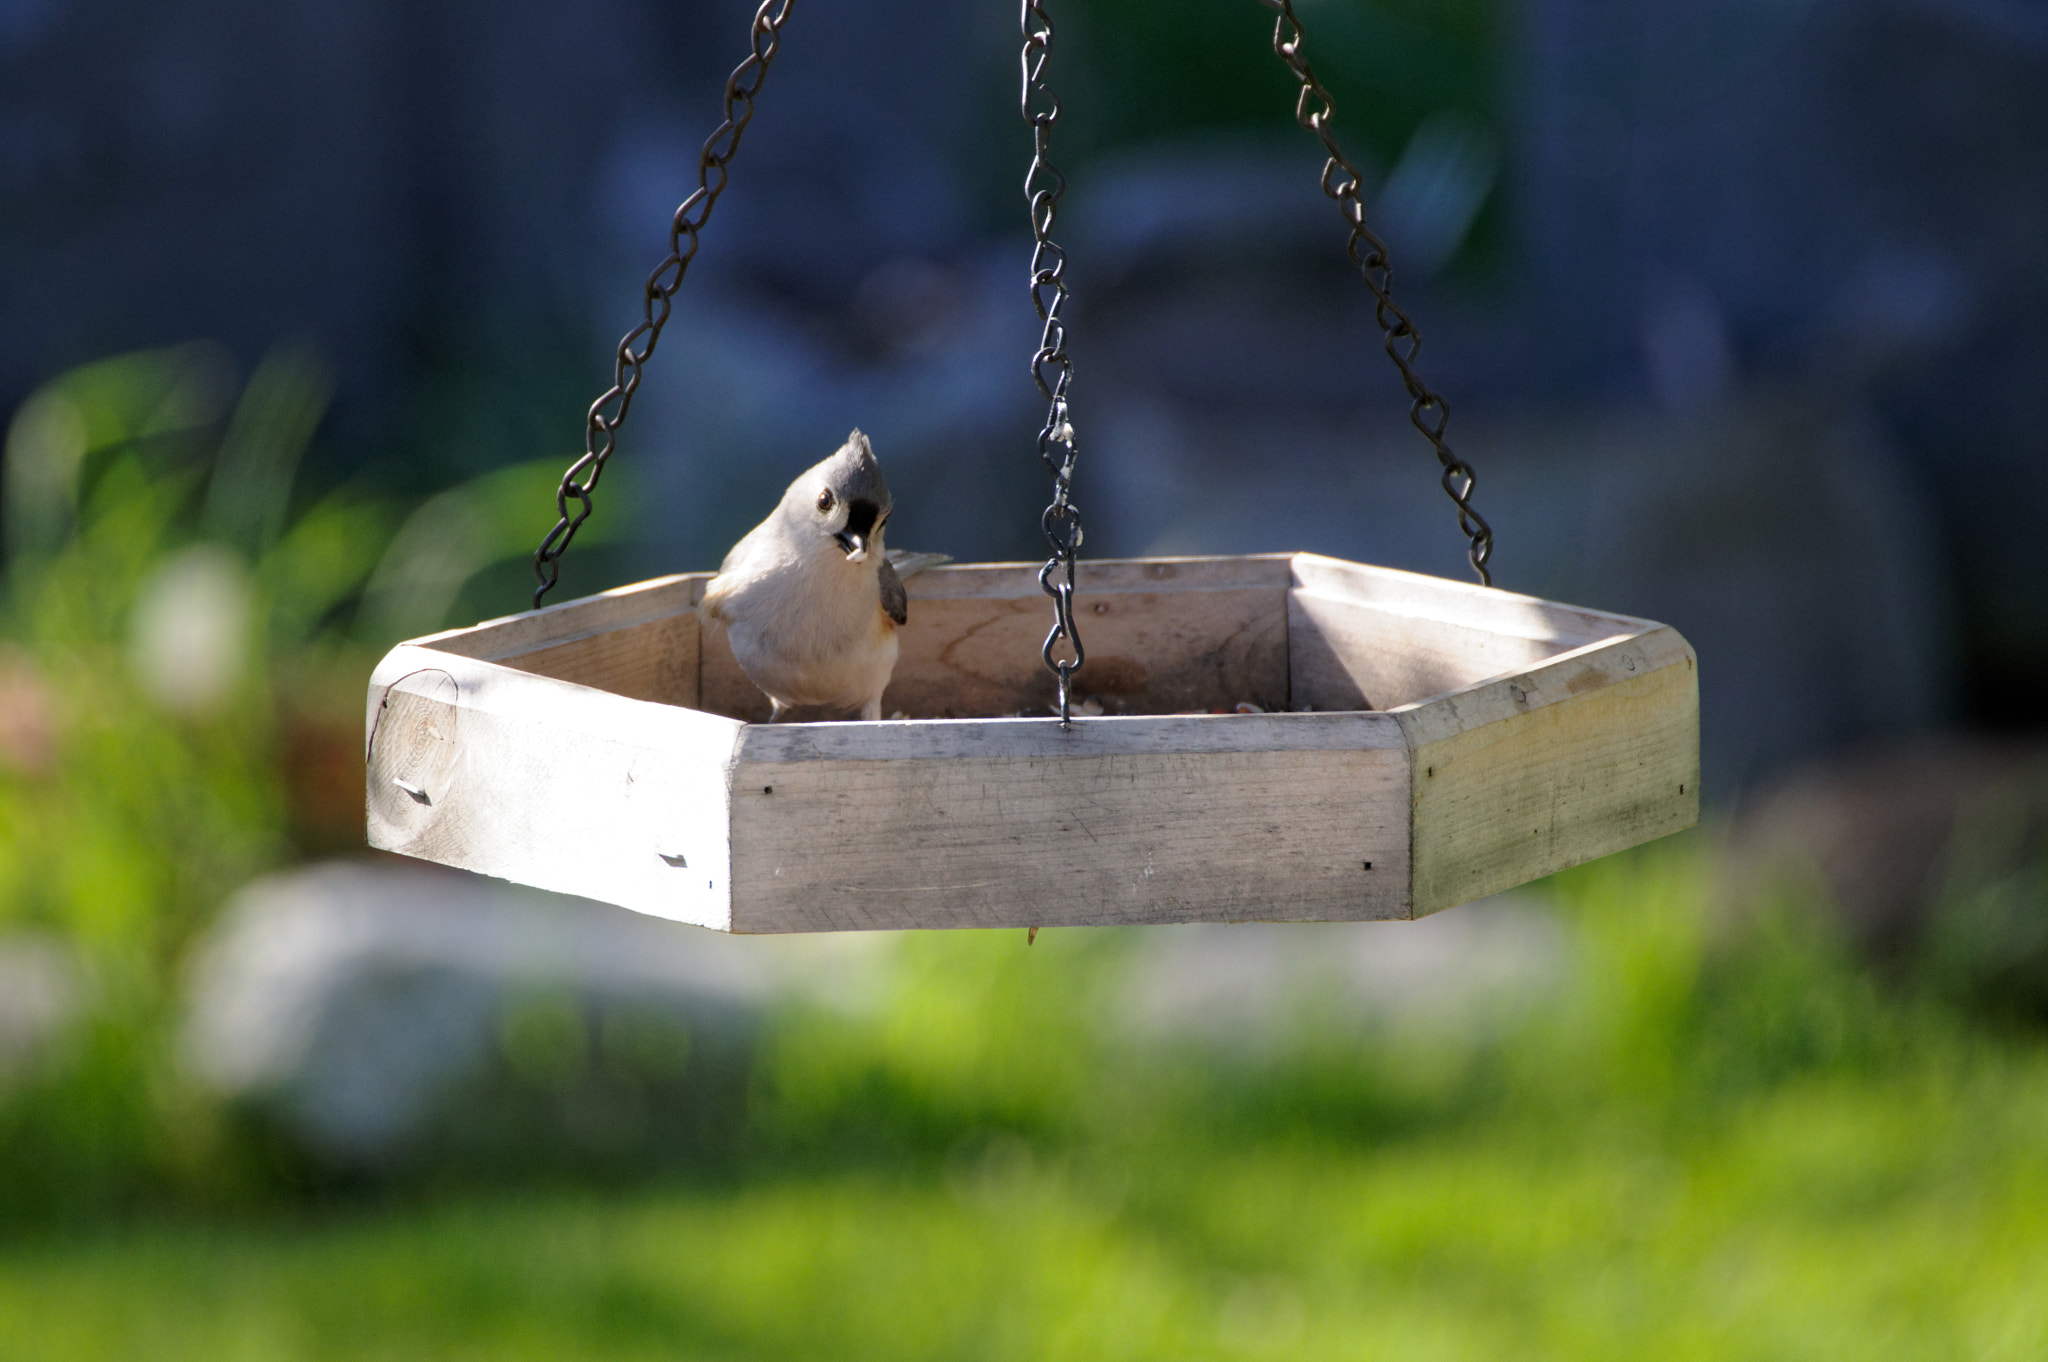 Pentax KP sample photo. Tufted titmouse snacking photography